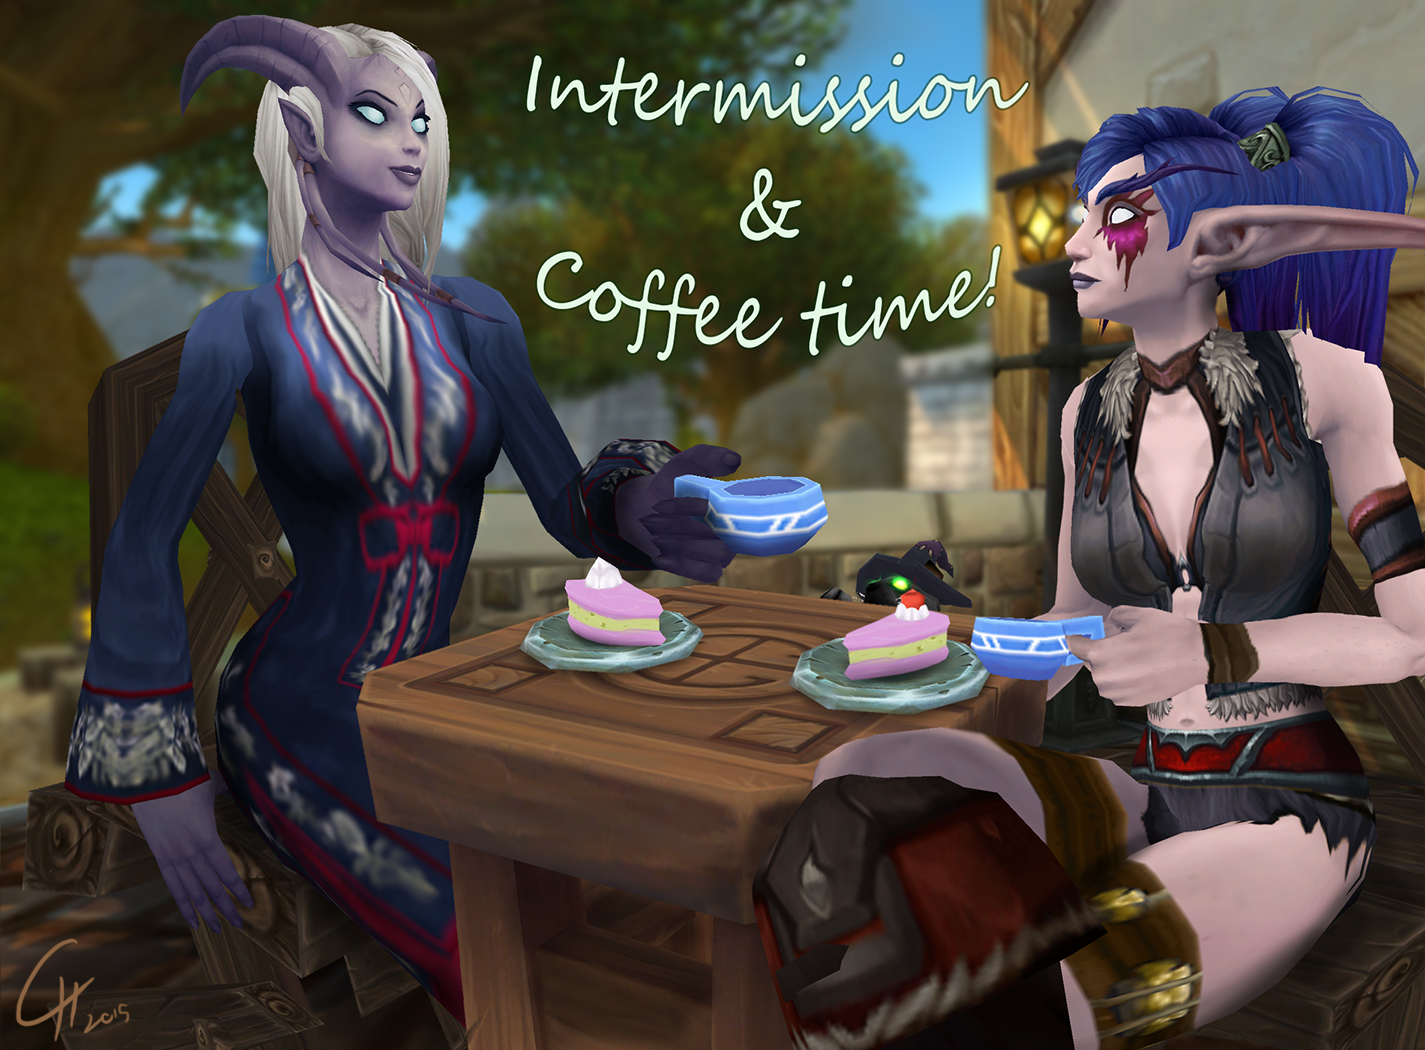 Coffee Time Intermission [Draenei/Nelf/SFW]
There is always time for cup of coffee.
Keywords: Draenei;Nelf;SFW